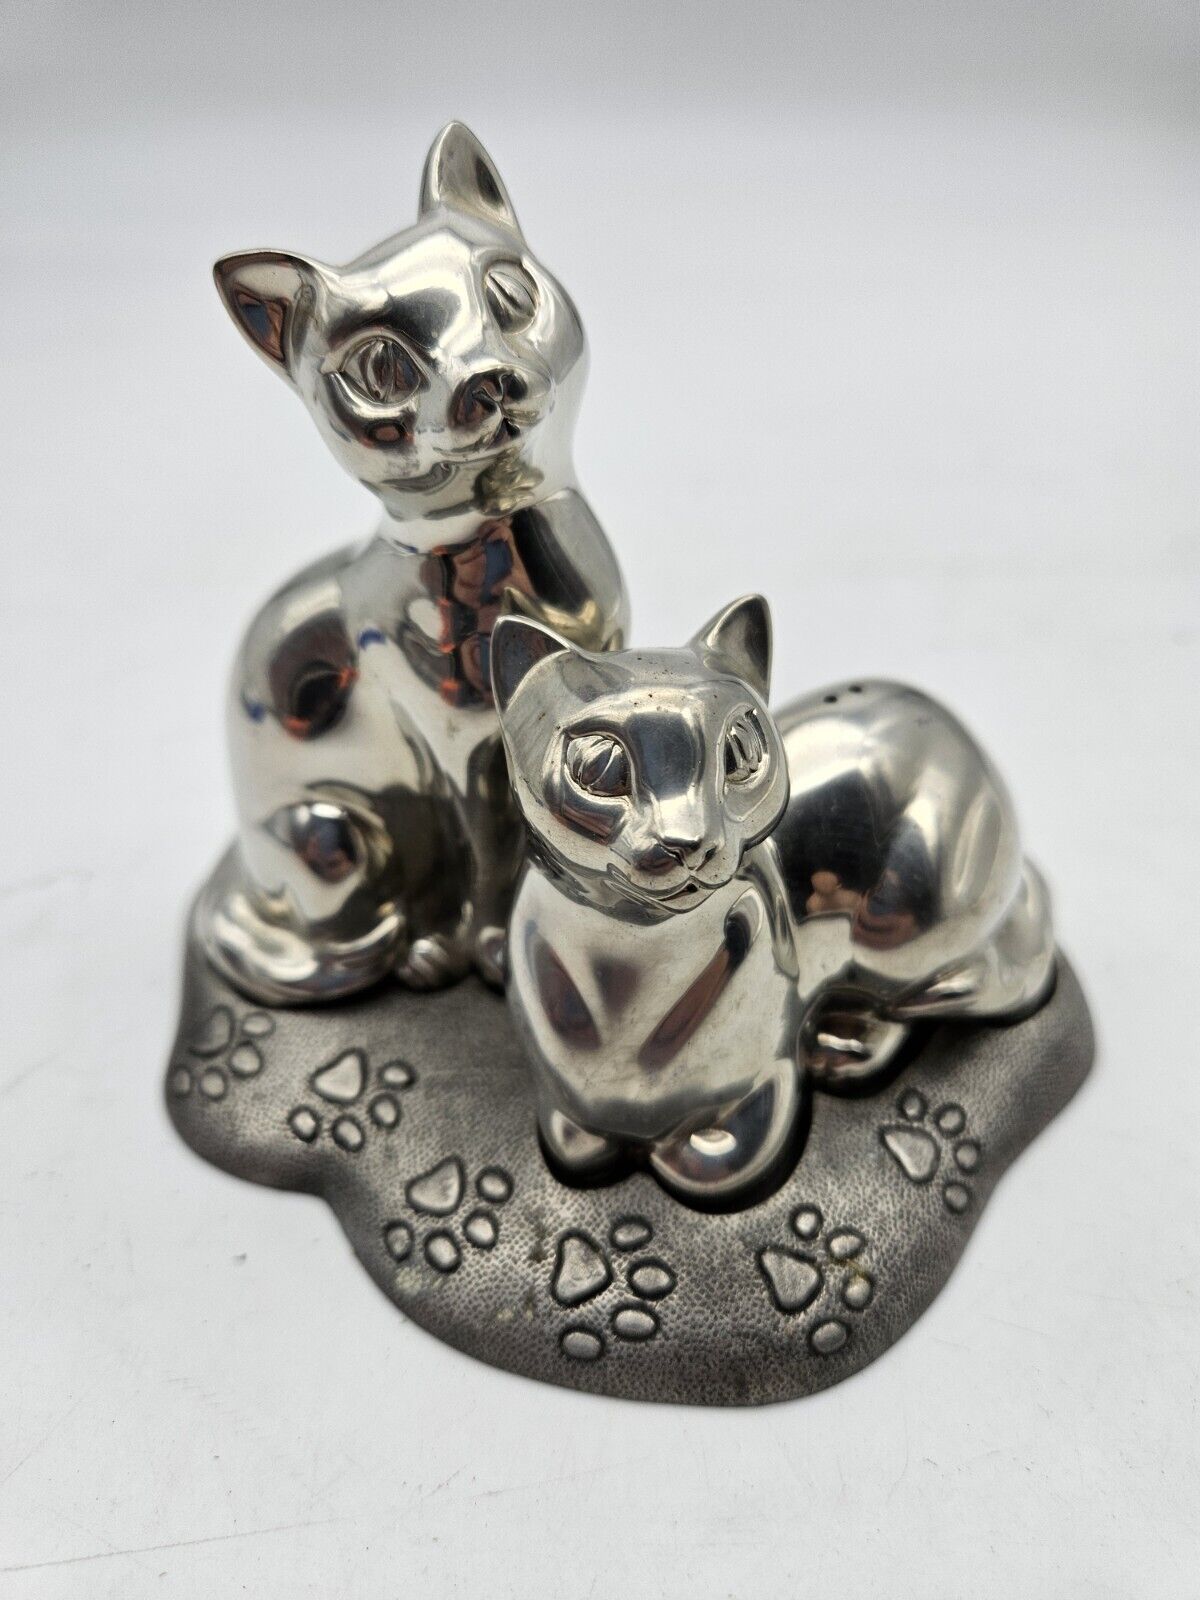 LENOX KIRK STIEFF COLLECTION VINTAGE PEWTER CAT SALT AND PEPPER SHAKER WITH BASE